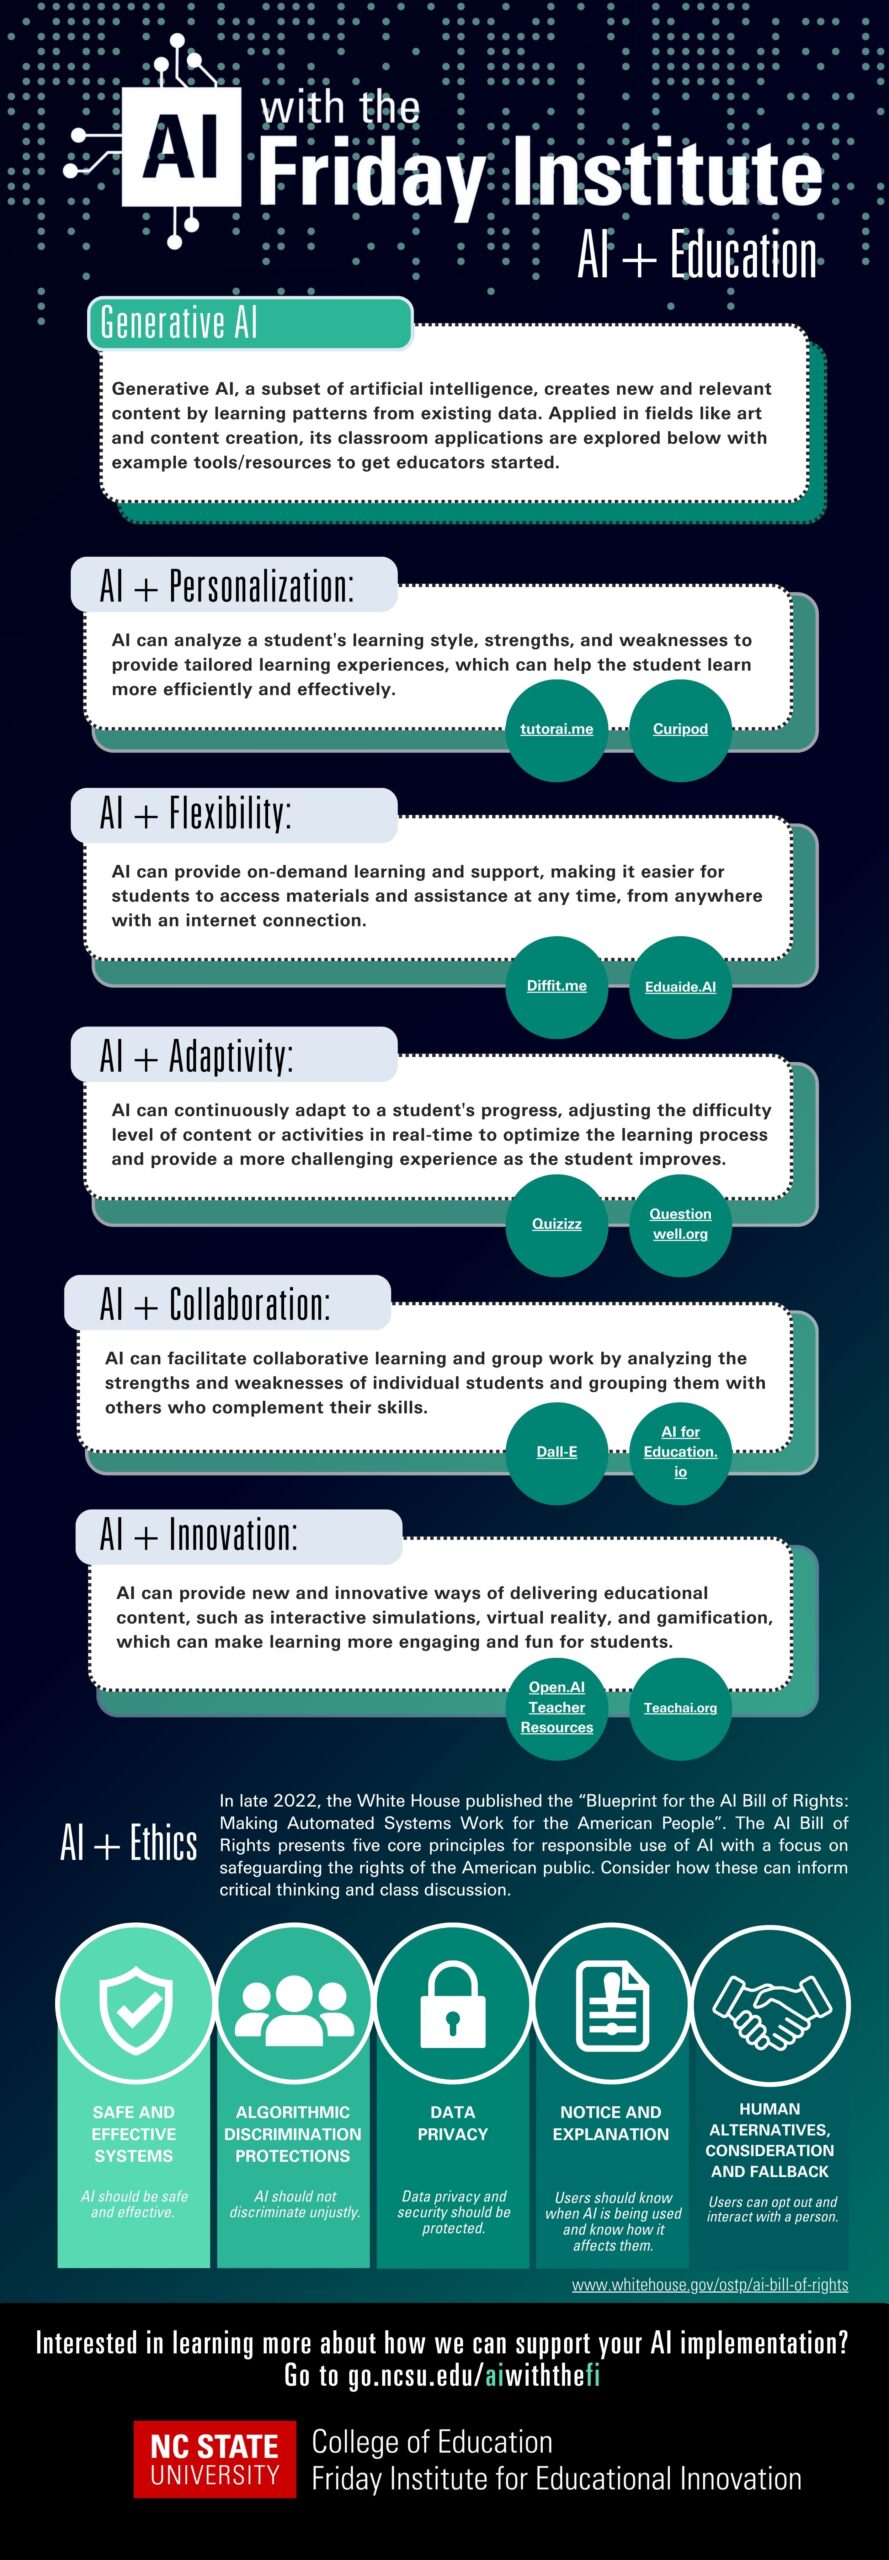 AI with the Friday Institute AI and Education infographic. Sections on Generative AI, AI and Personalization, AI and flexibility, AI and adaptivity, AI and collaboration, AI and innovation, and AI and ethics.